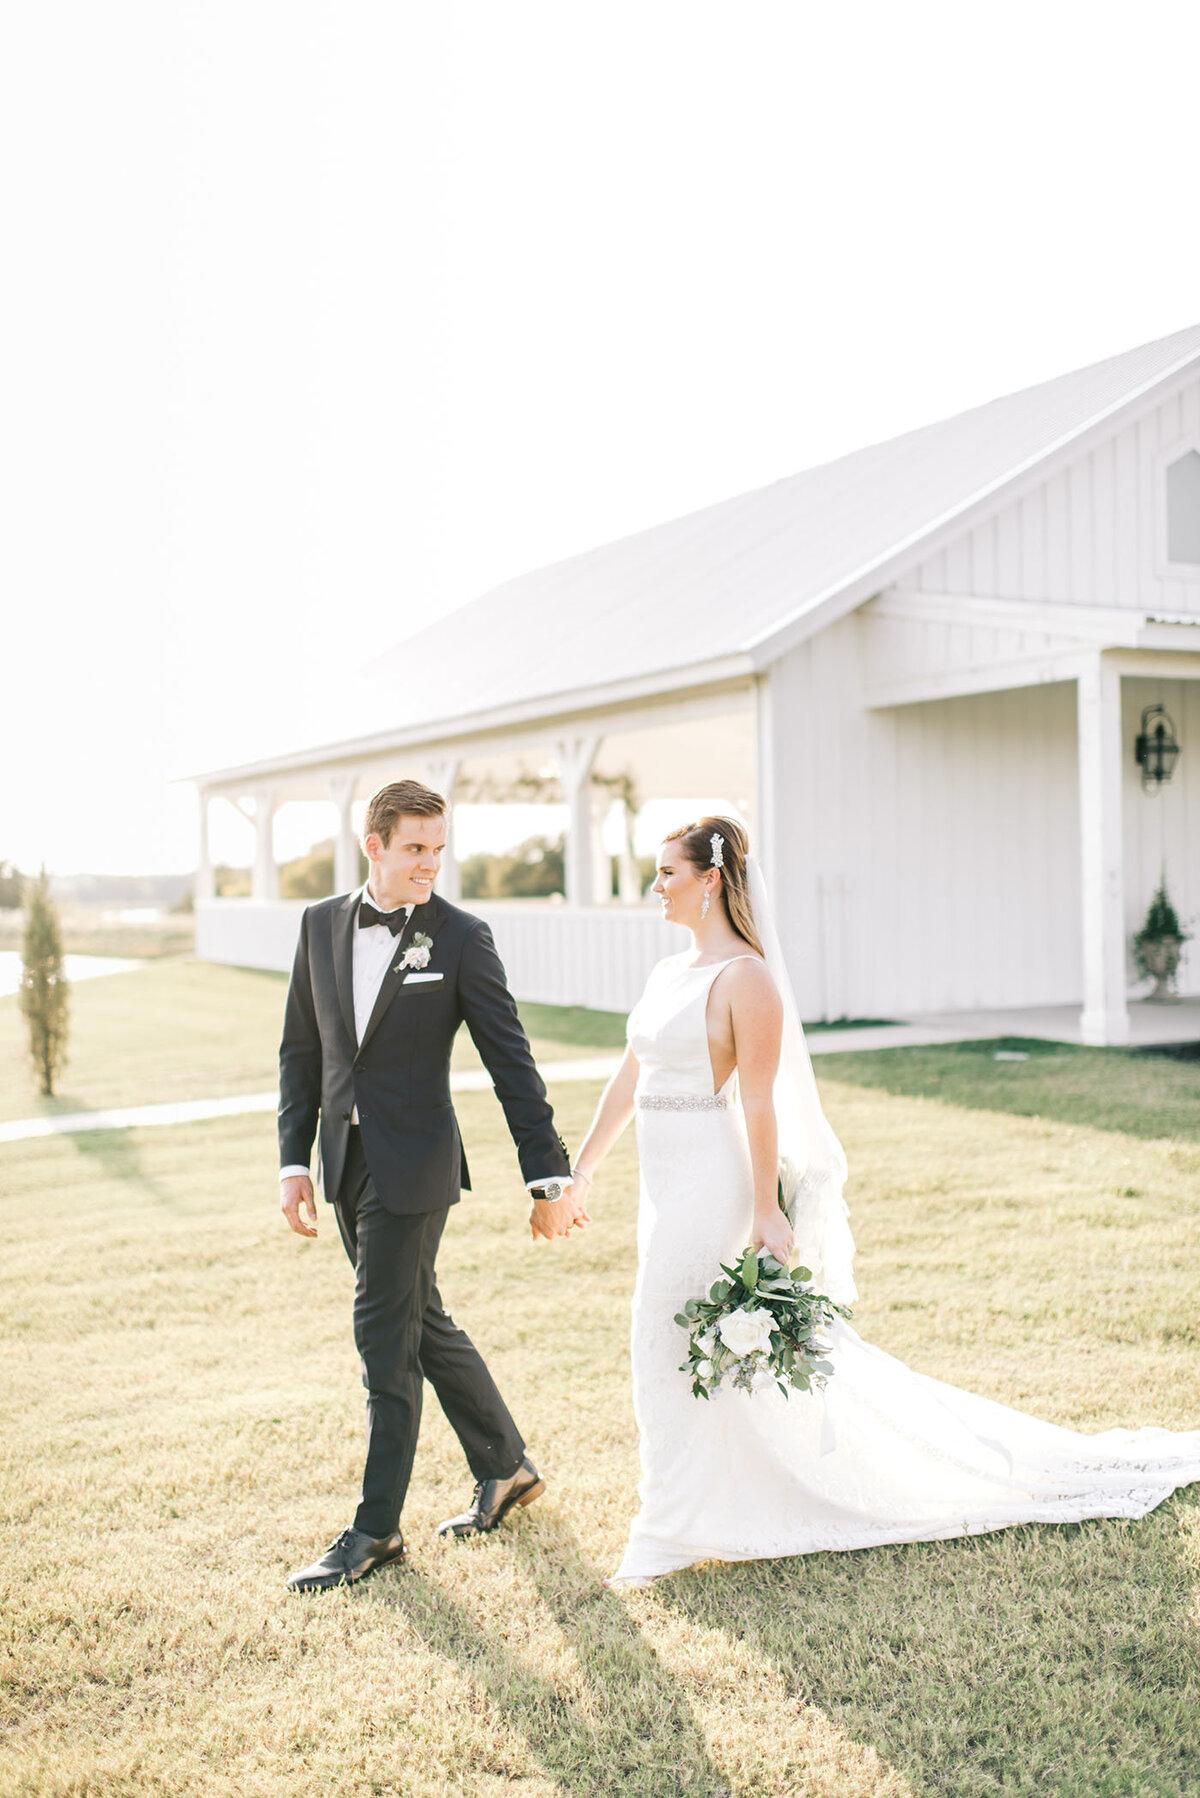 Allora & Ivy Event Co - Dallas Wedding Planner - Brittany Brooks - The Grand Ivory